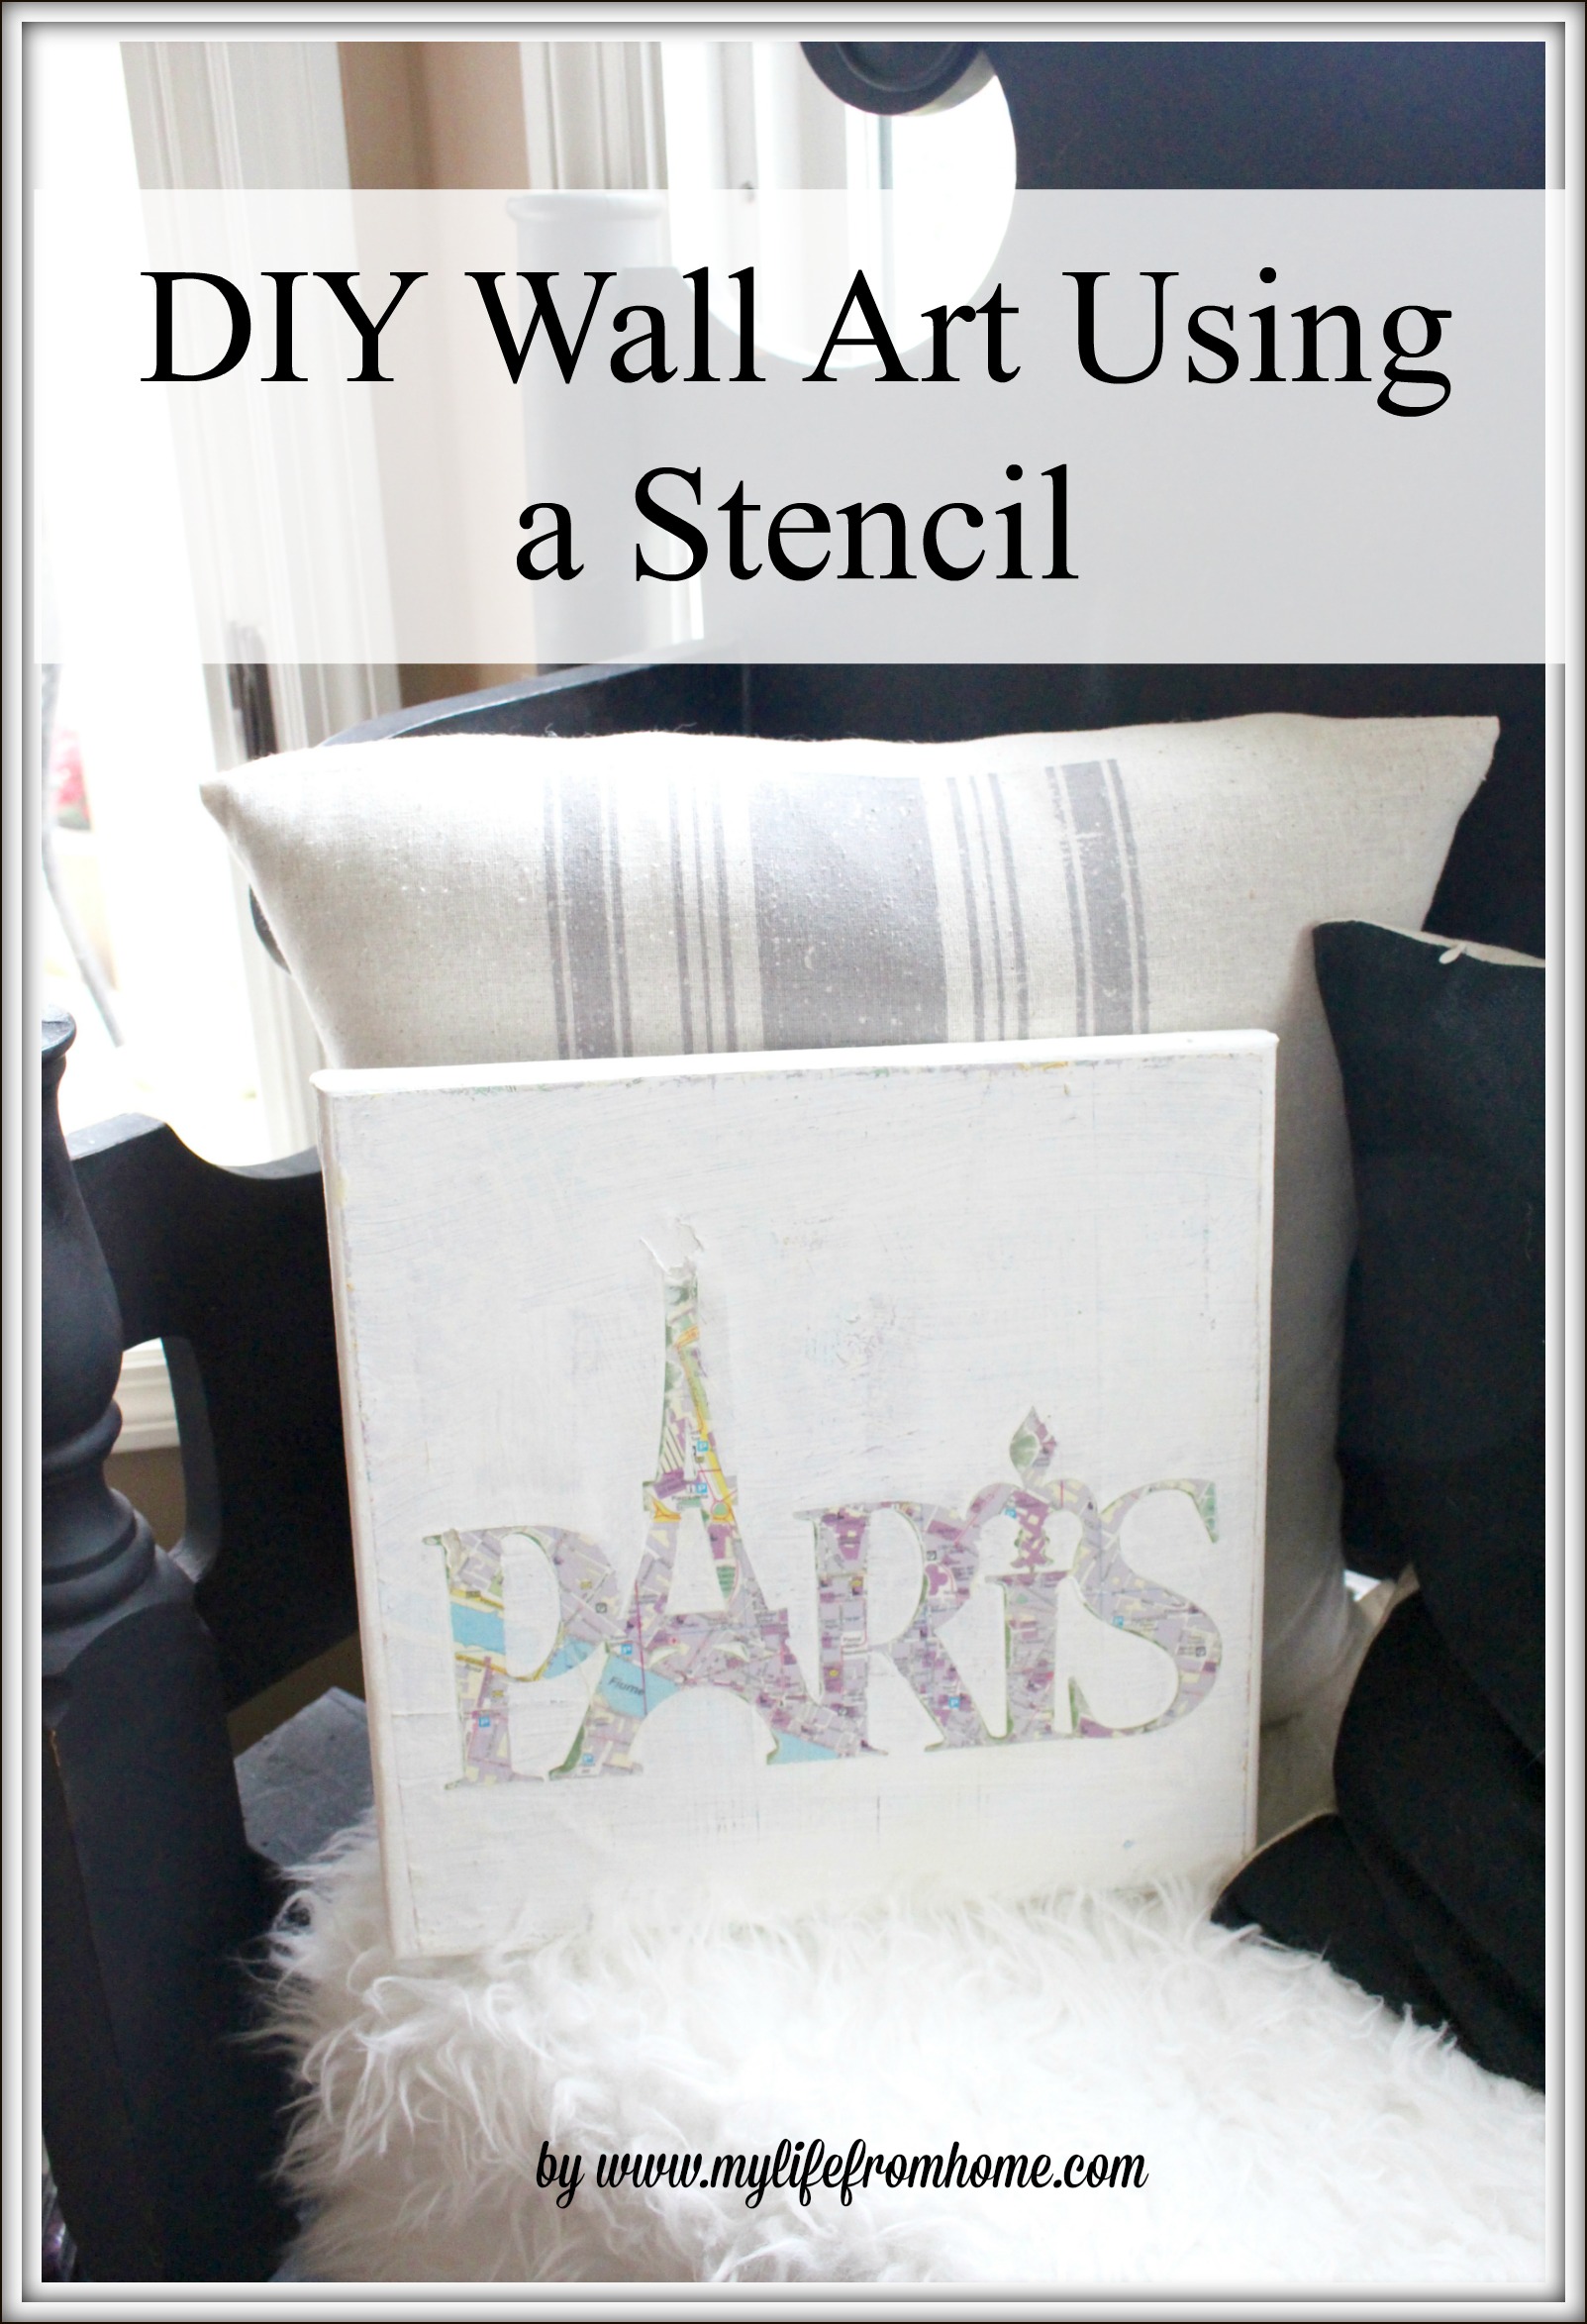 diy-wall-art-canvas-stencil-diy-canvas-art-mod-podge-projects-silhouette-cameo-projects-paris-themed-art